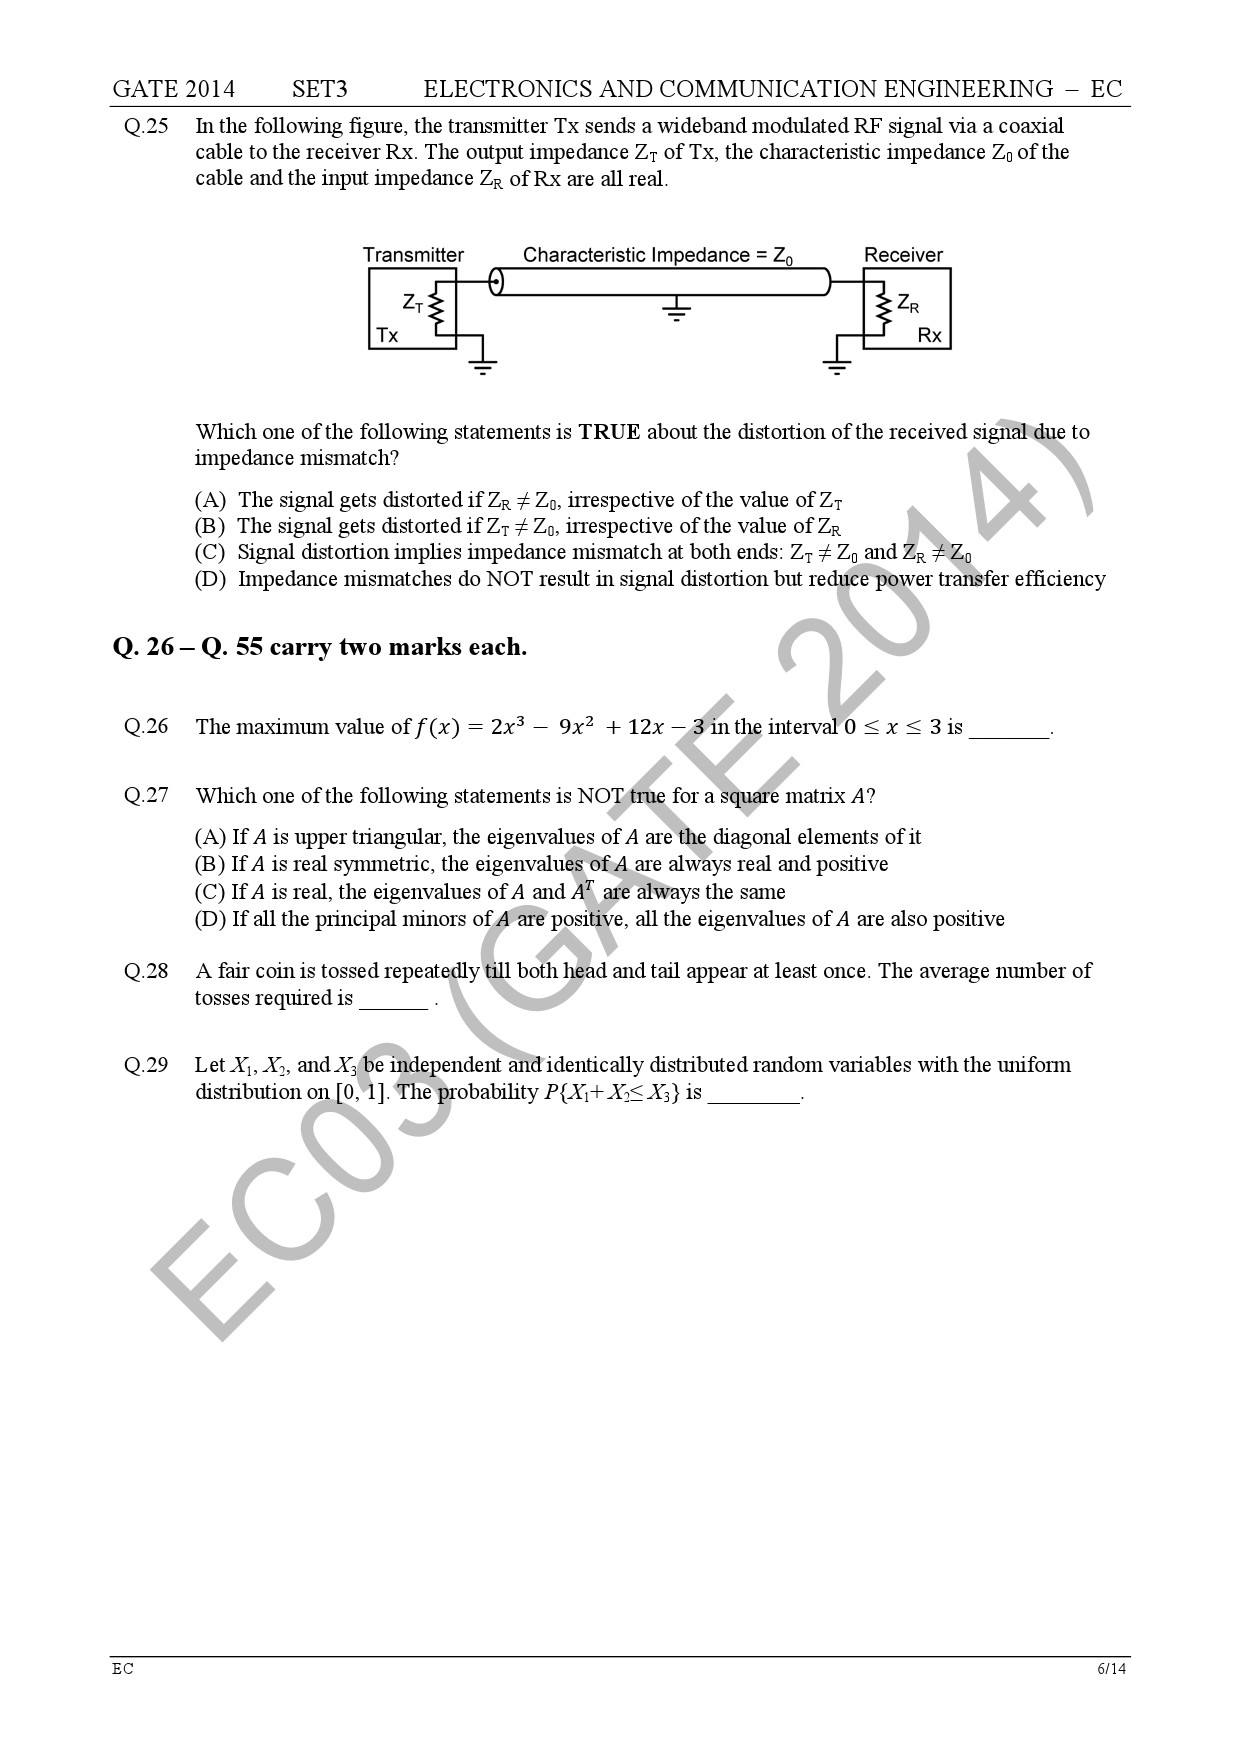 GATE Exam Question Paper 2014 Electronics and Communication Engineering Set 3 13